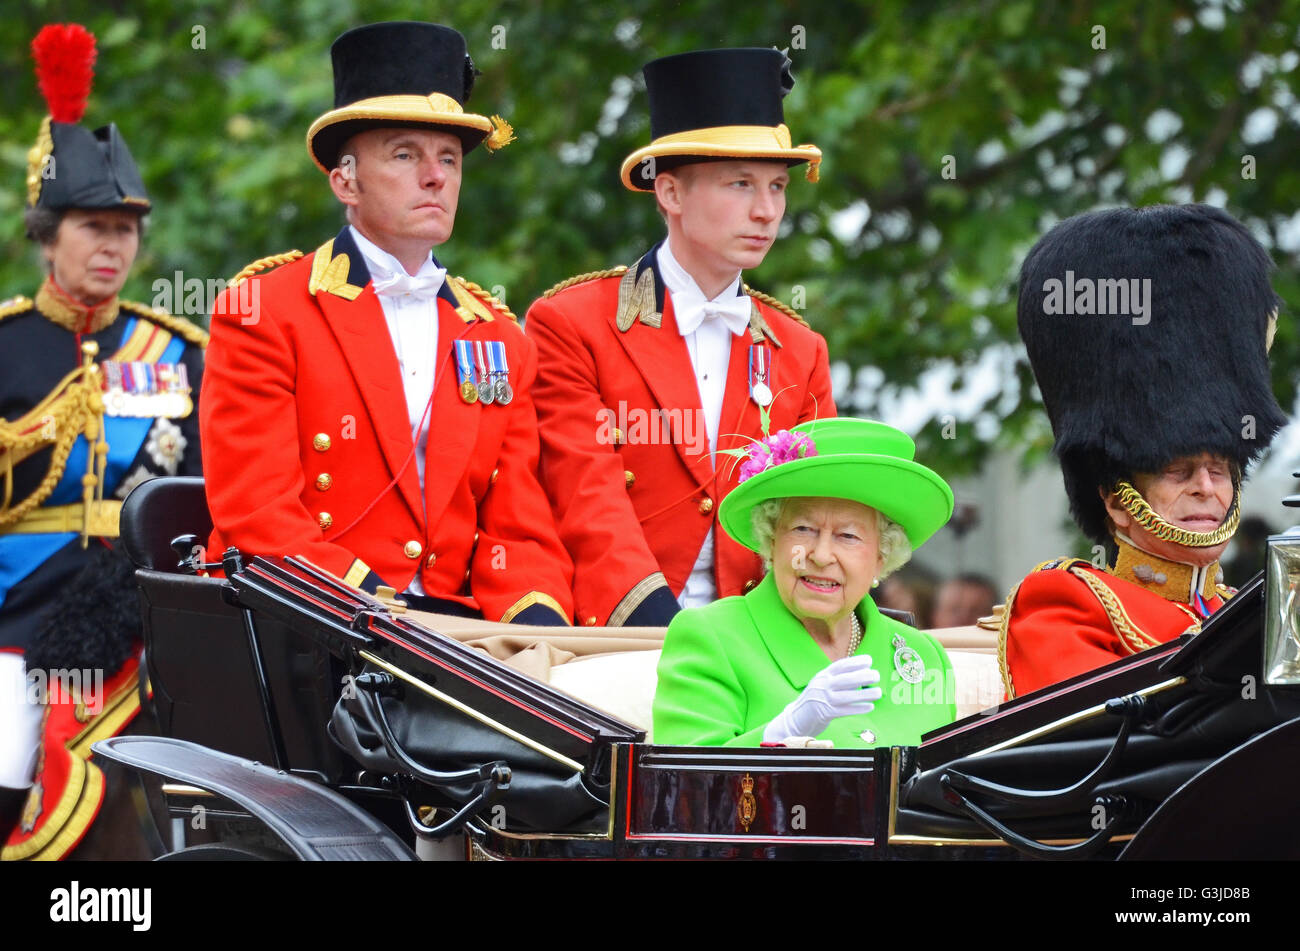 The Queen in a carriage at Trooping the Colour 2016 with Prince Philip and footmen. Green outfit. Queen Elizabth II, with Anne, Princess Royal behind Stock Photo